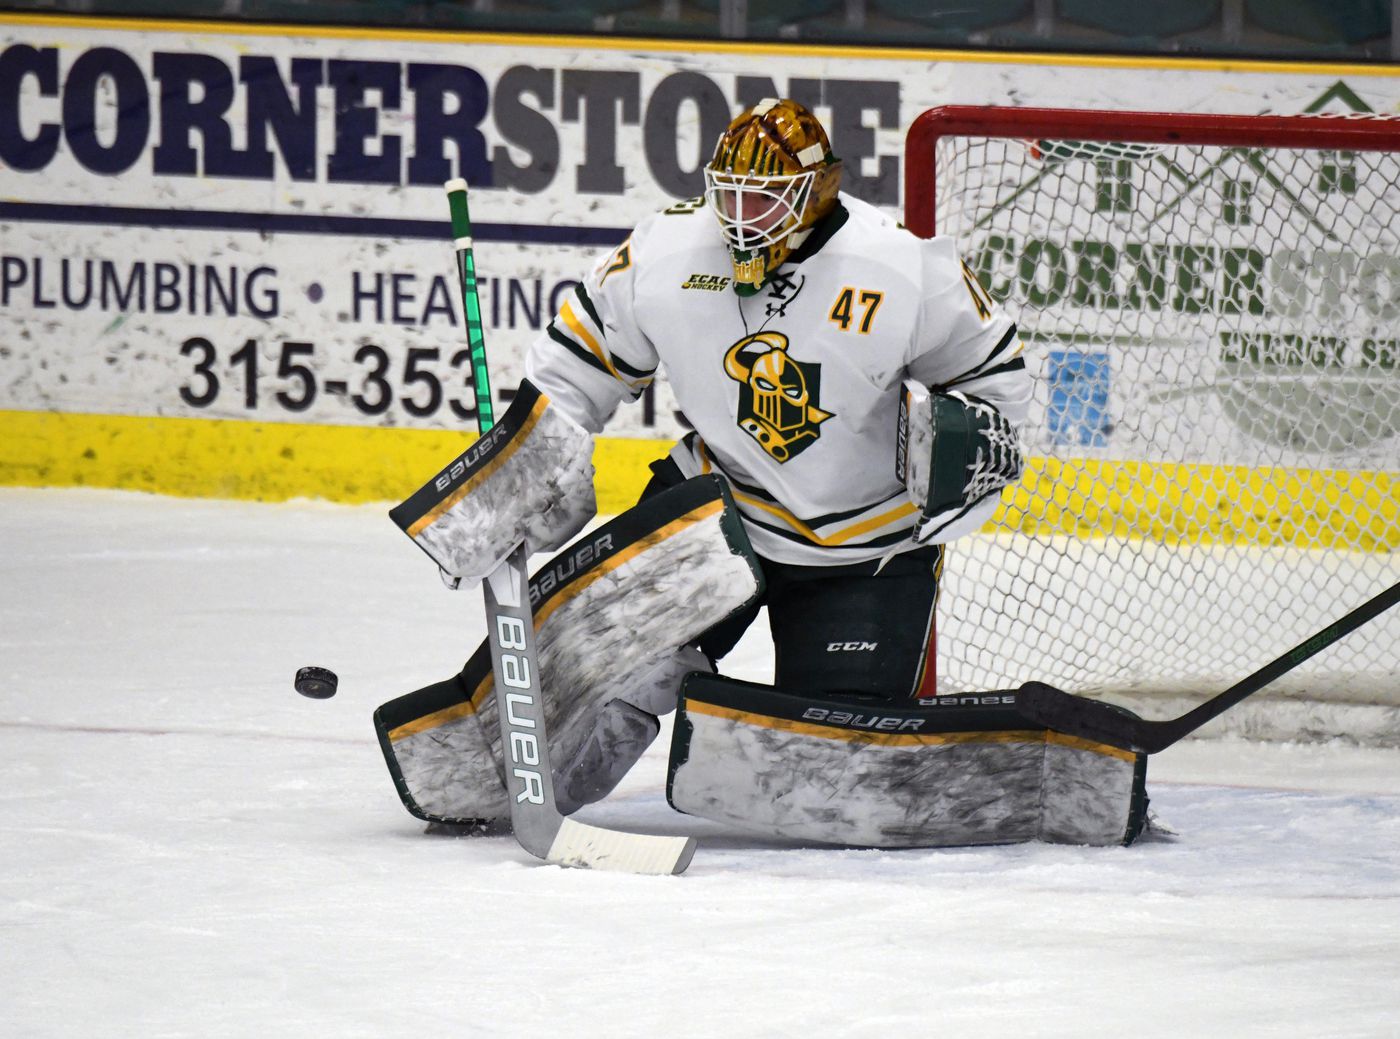 Clarkson University goalie makes a save in the butterfly position.